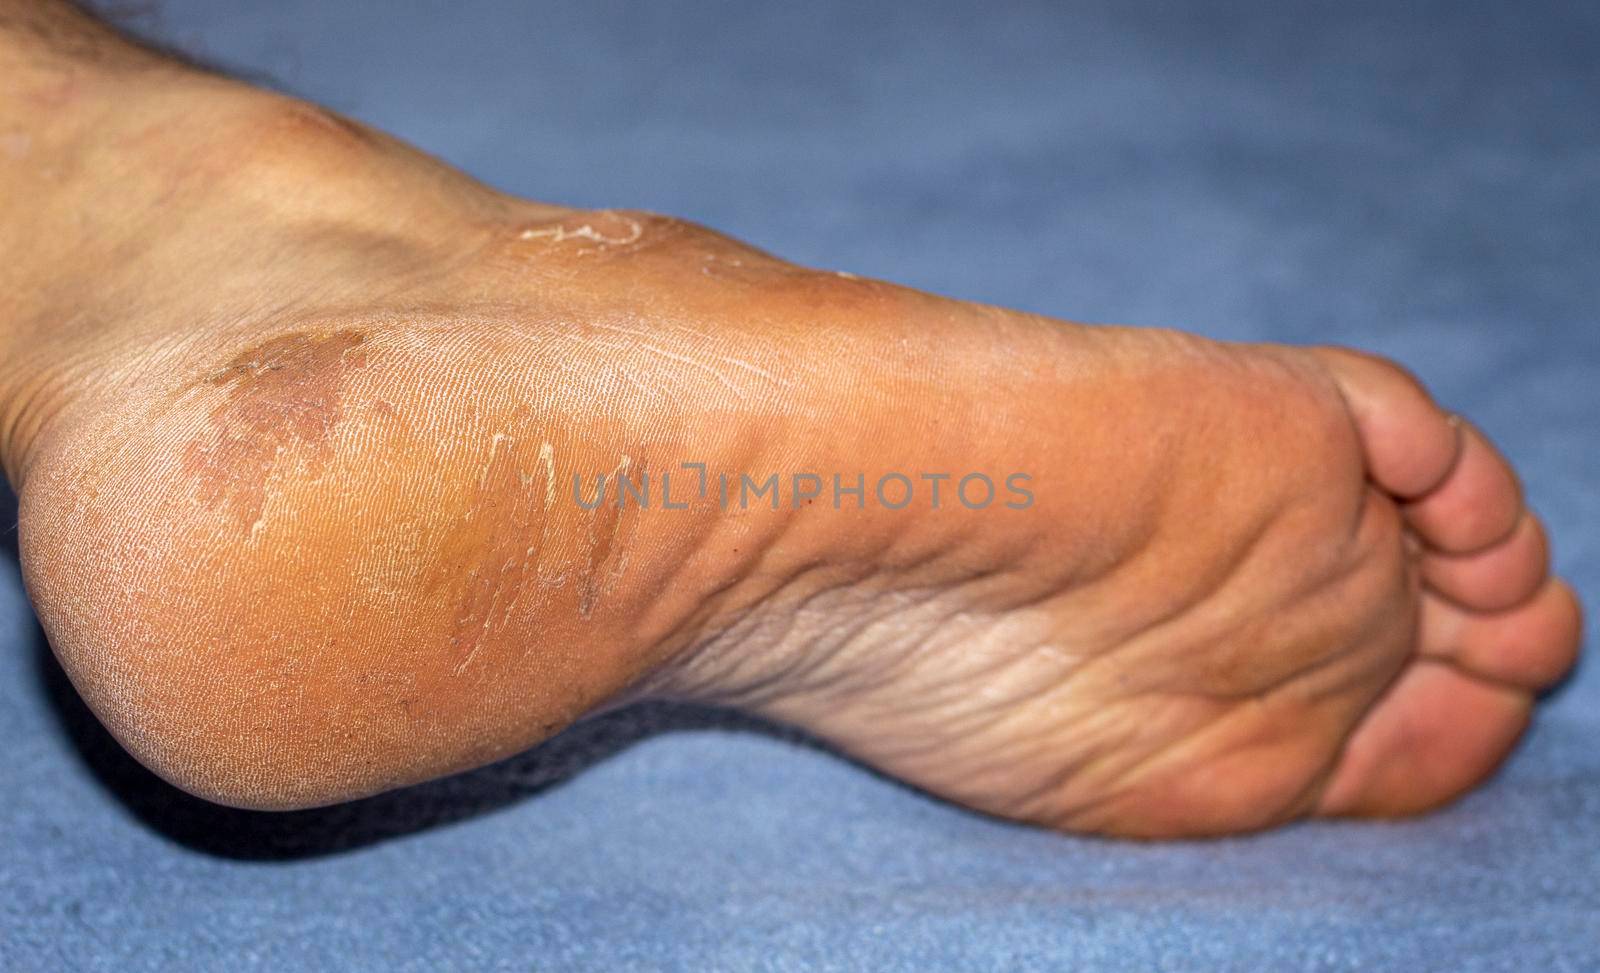 Heel disease with hard skin and itchy soles by bybyphotography